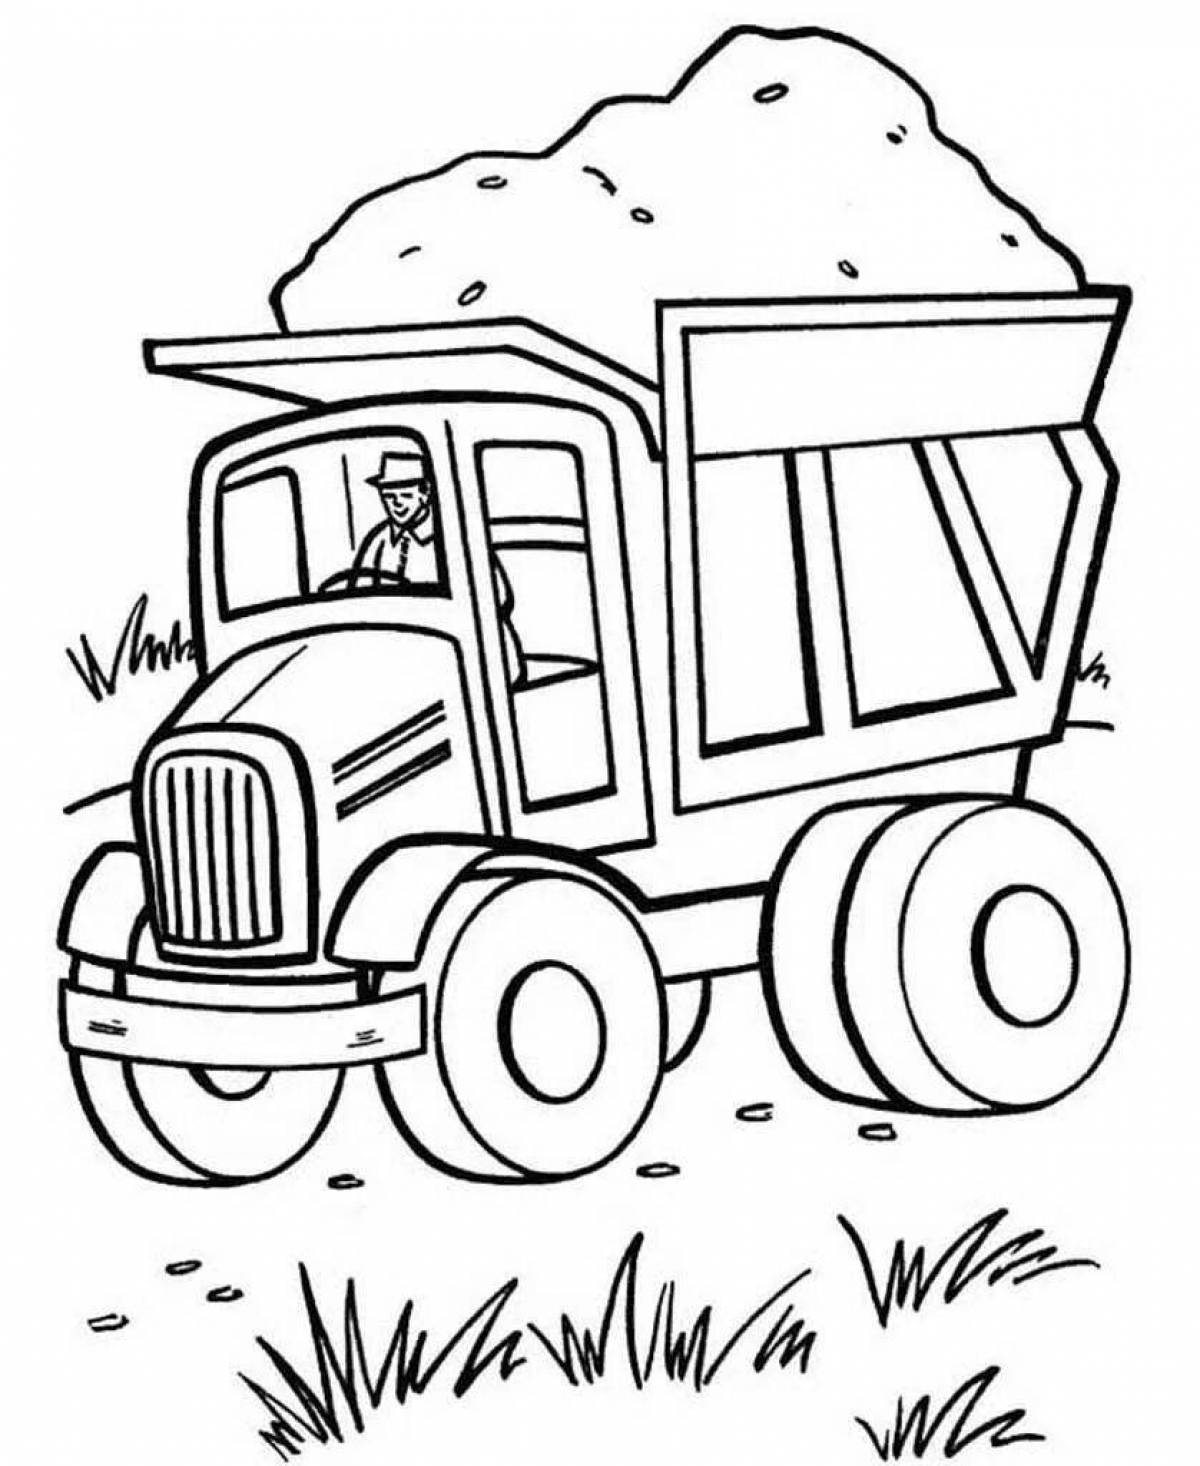 Shiny truck coloring page for 4-5 year olds